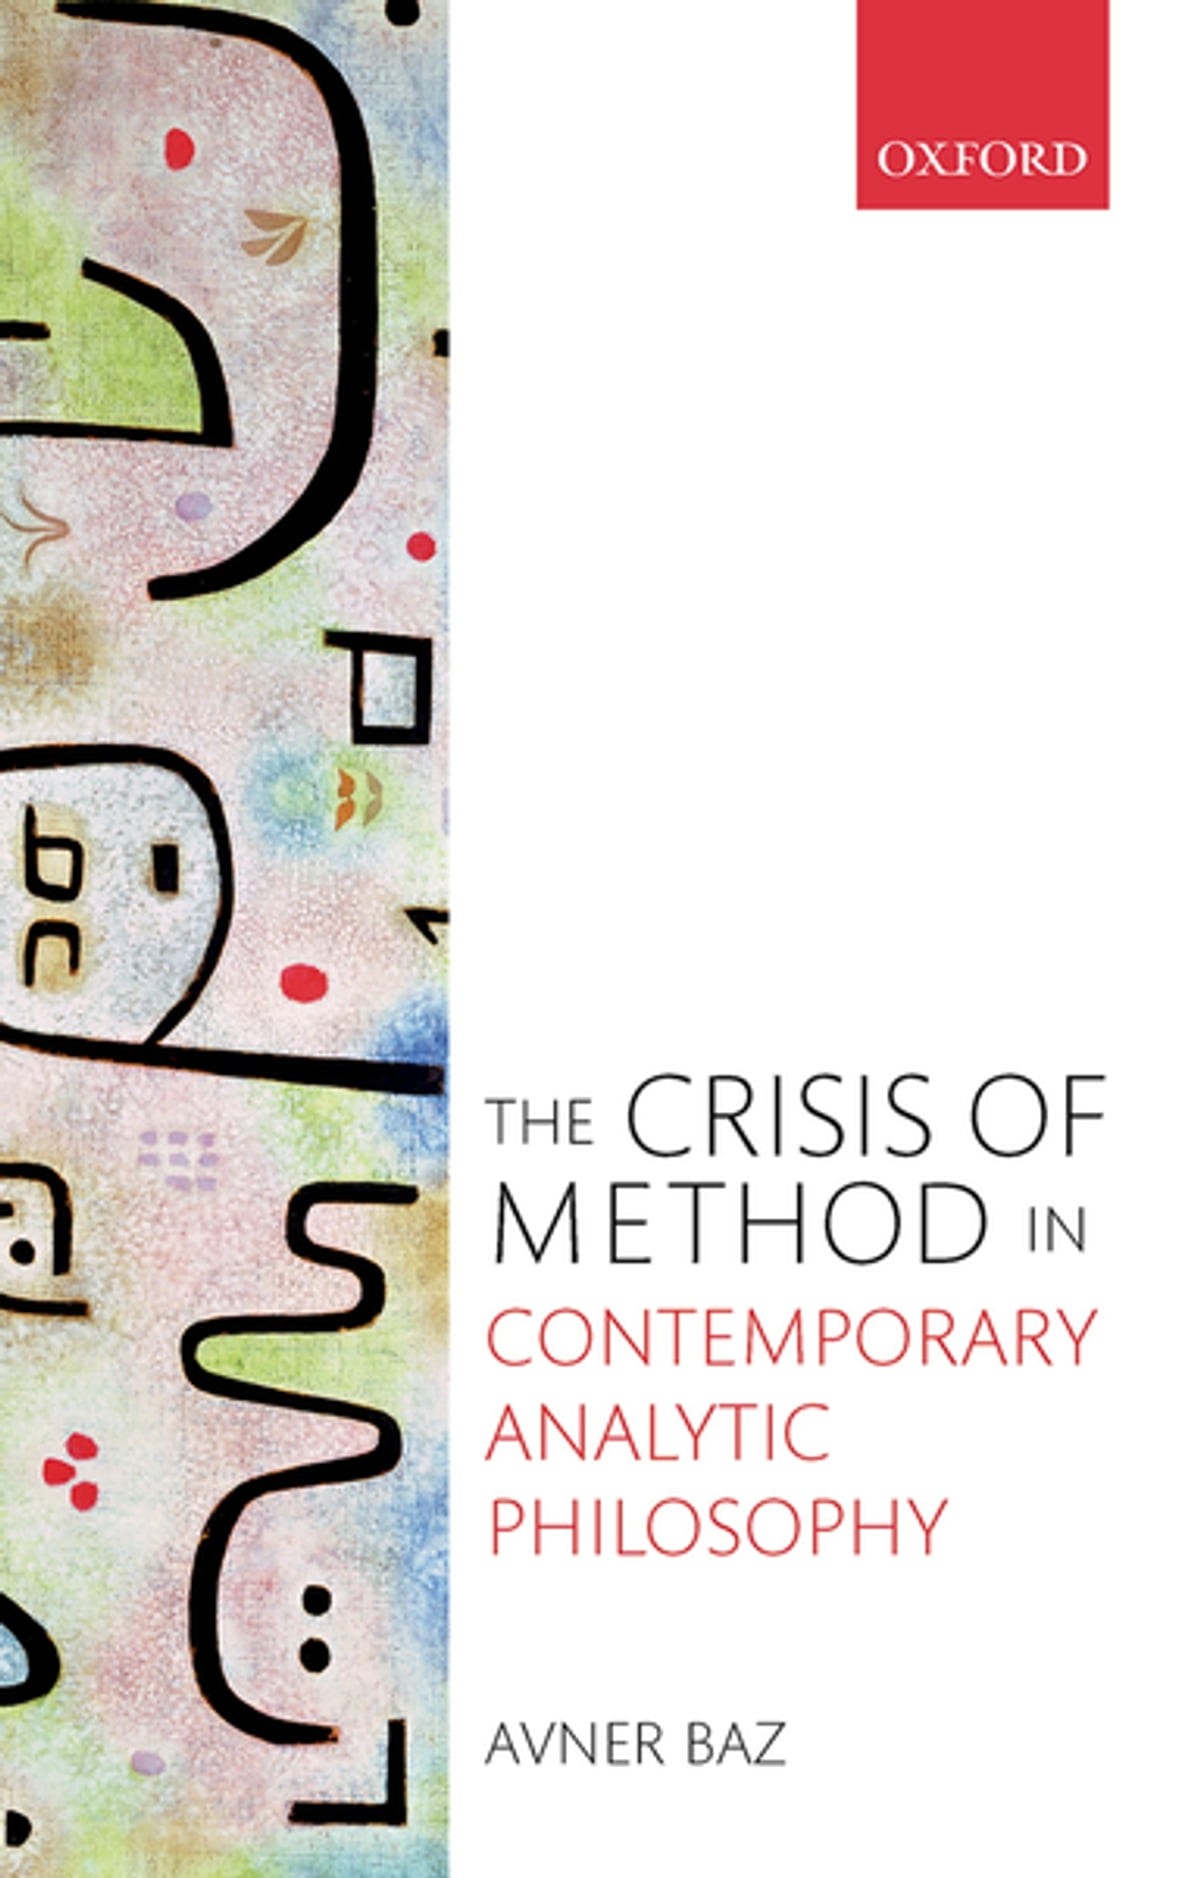 The Crisis of Method in Contemporary Analytic Philosophy